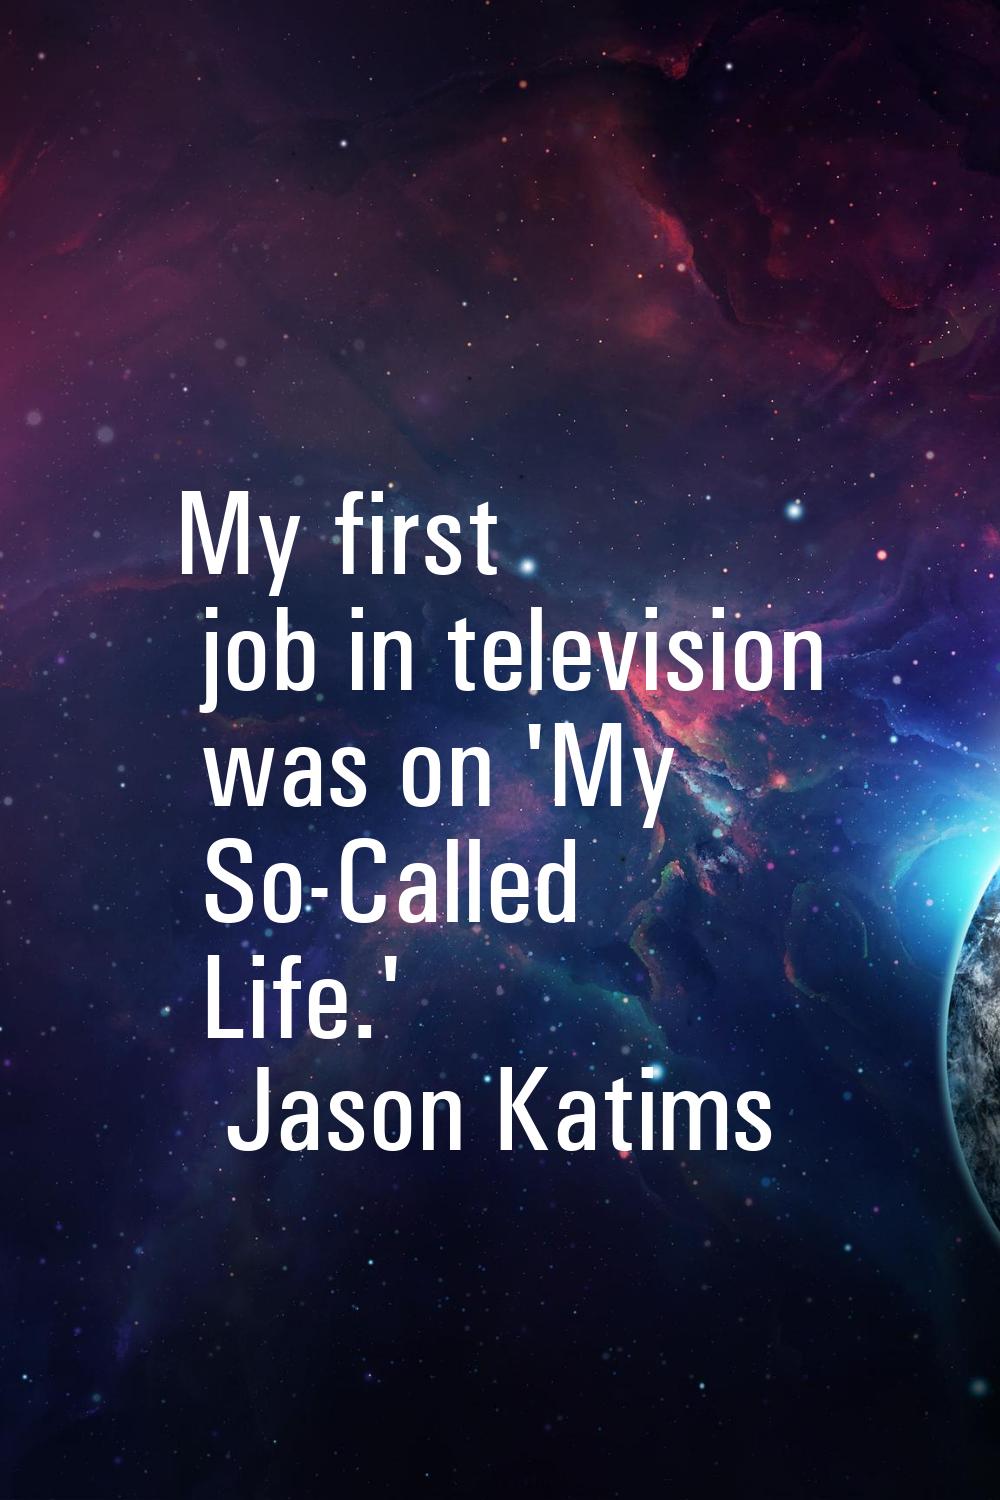 My first job in television was on 'My So-Called Life.'